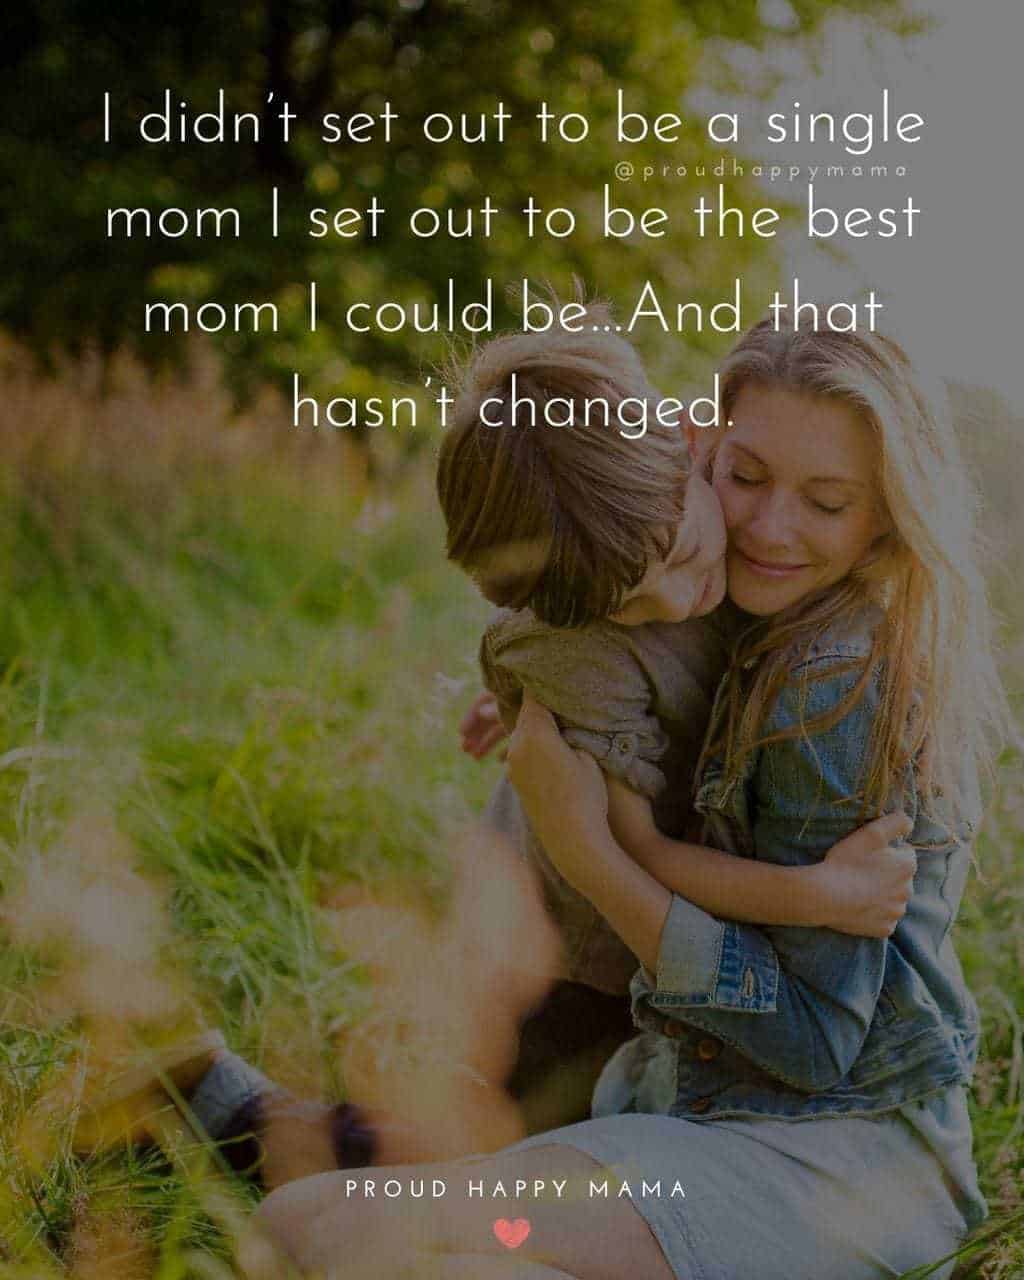 Single Mom Quotes - I didnt set out to be a single mom I set out to be the best mom I could be…And that hasnt changed.